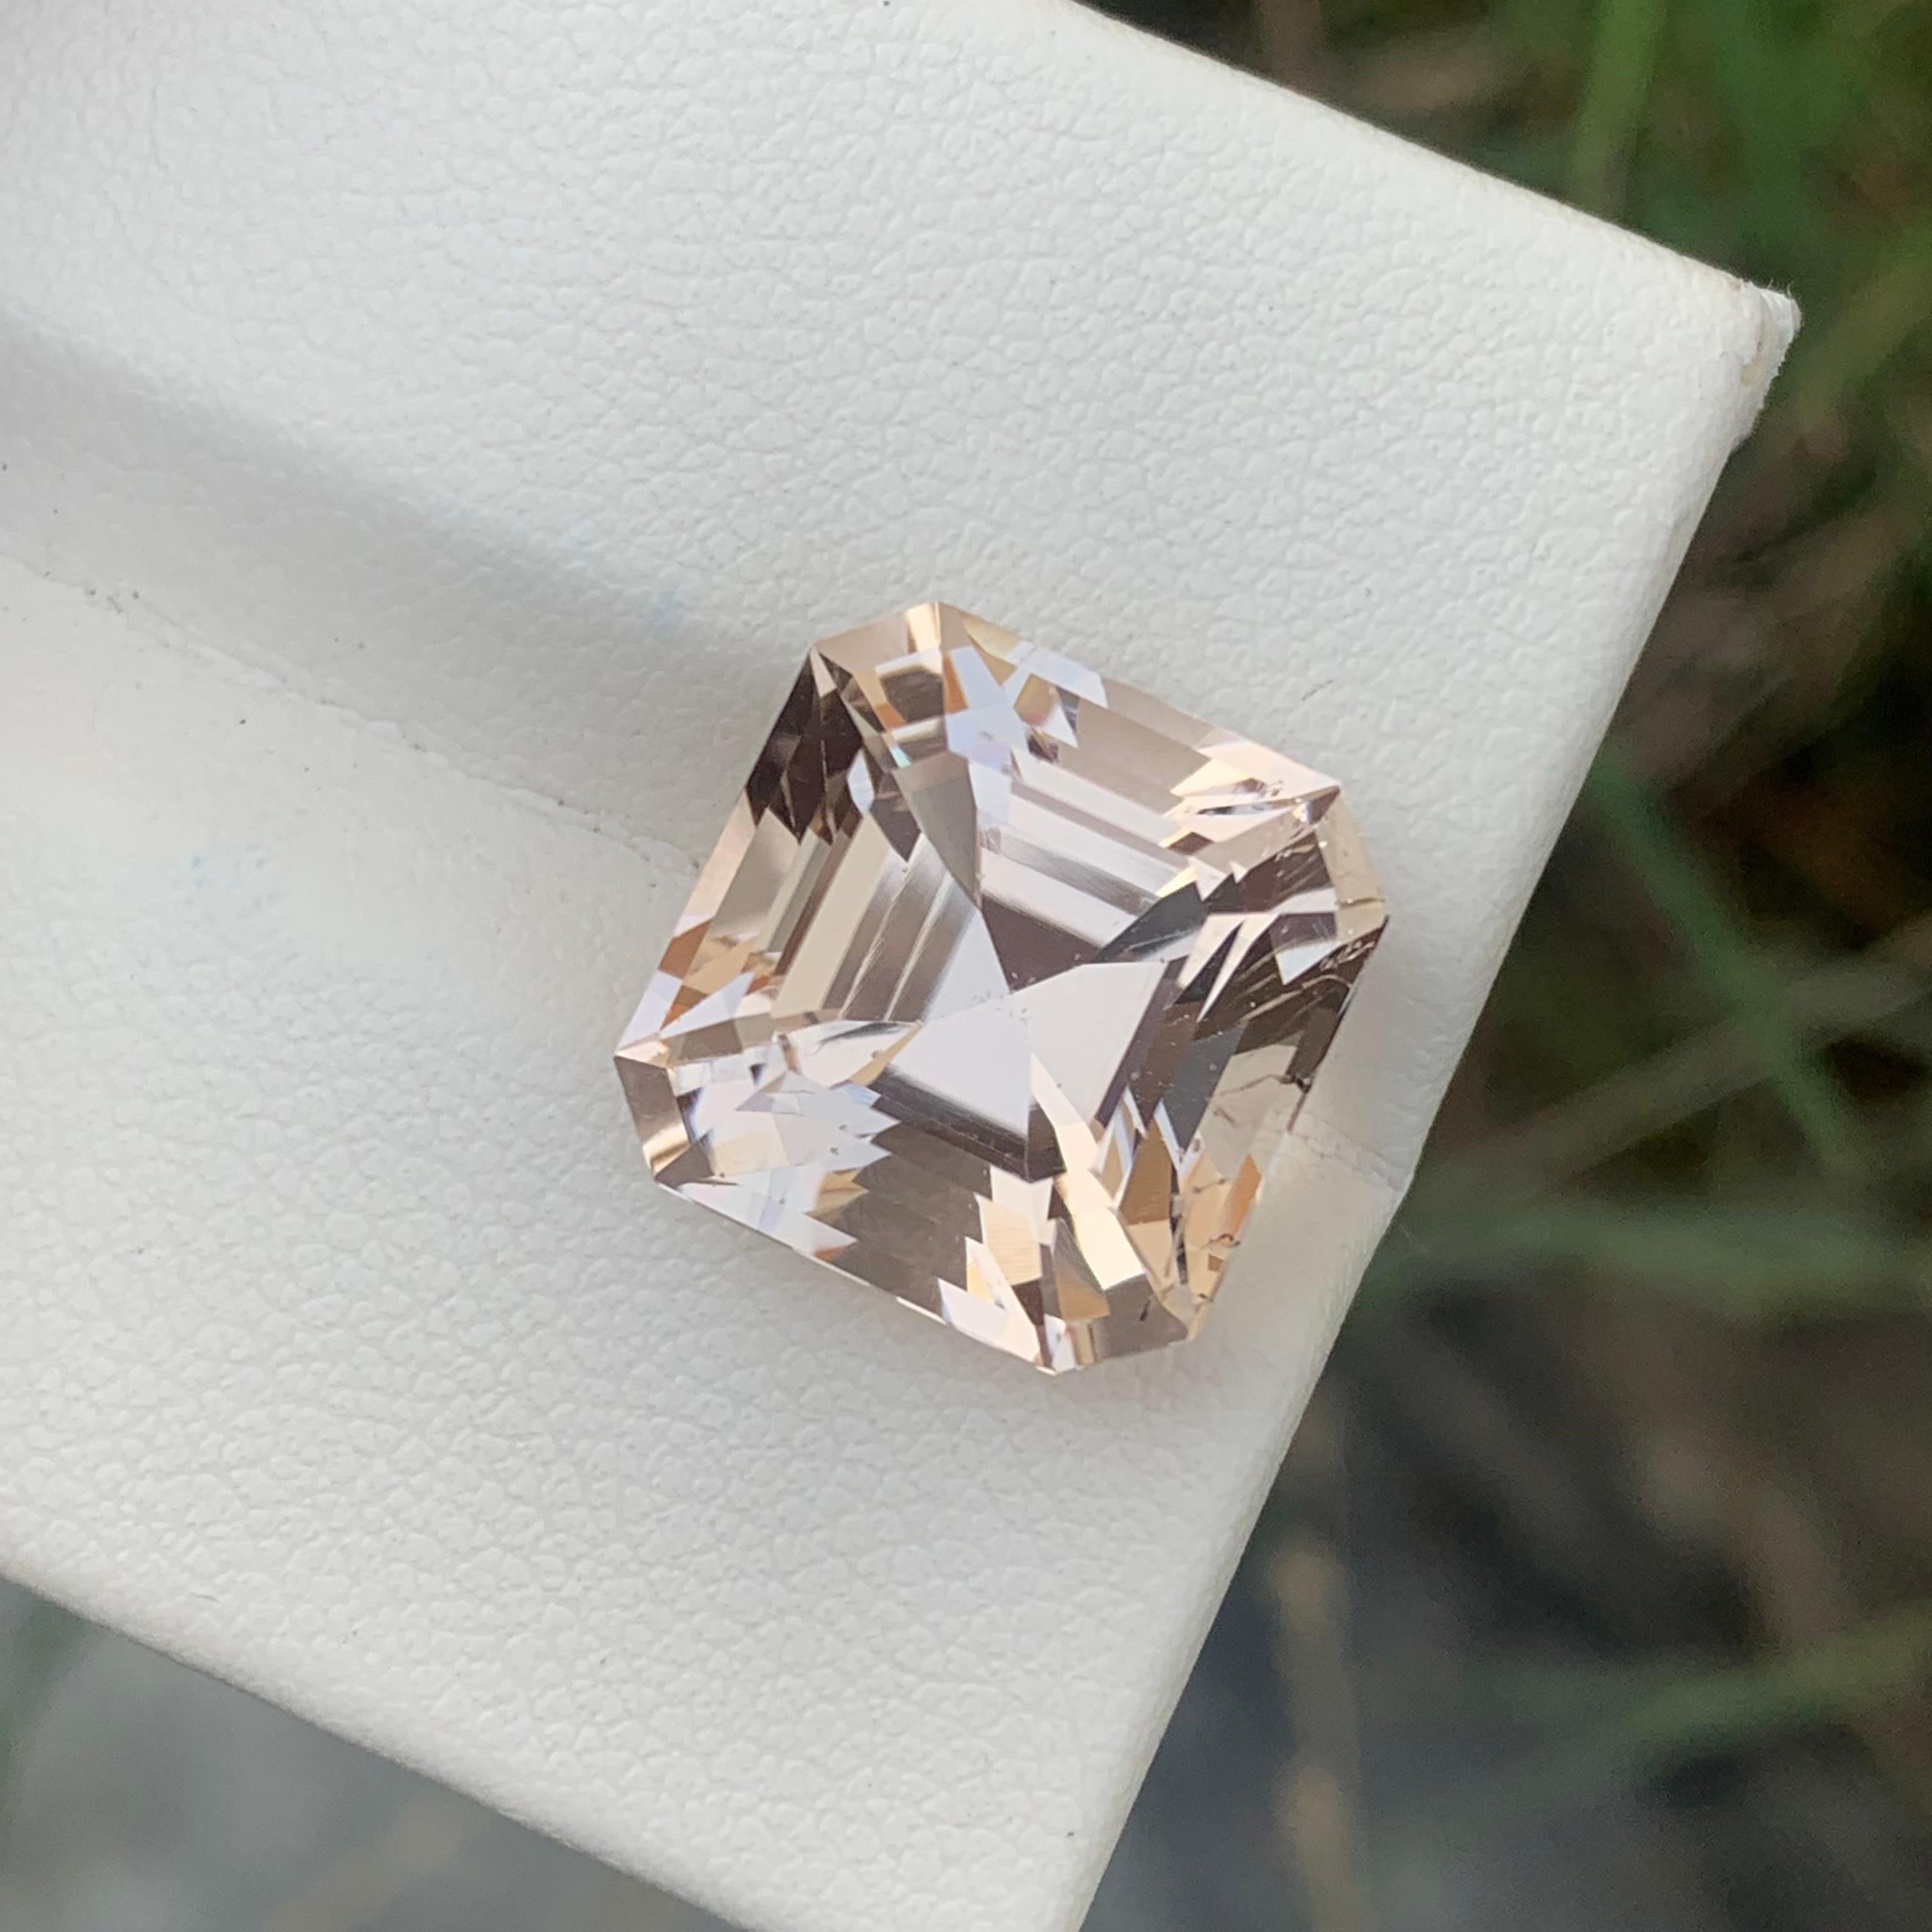 12.15 Carats Natural Loose Imperial Morganite Asscher Cut Gem For Jewelry Making 1